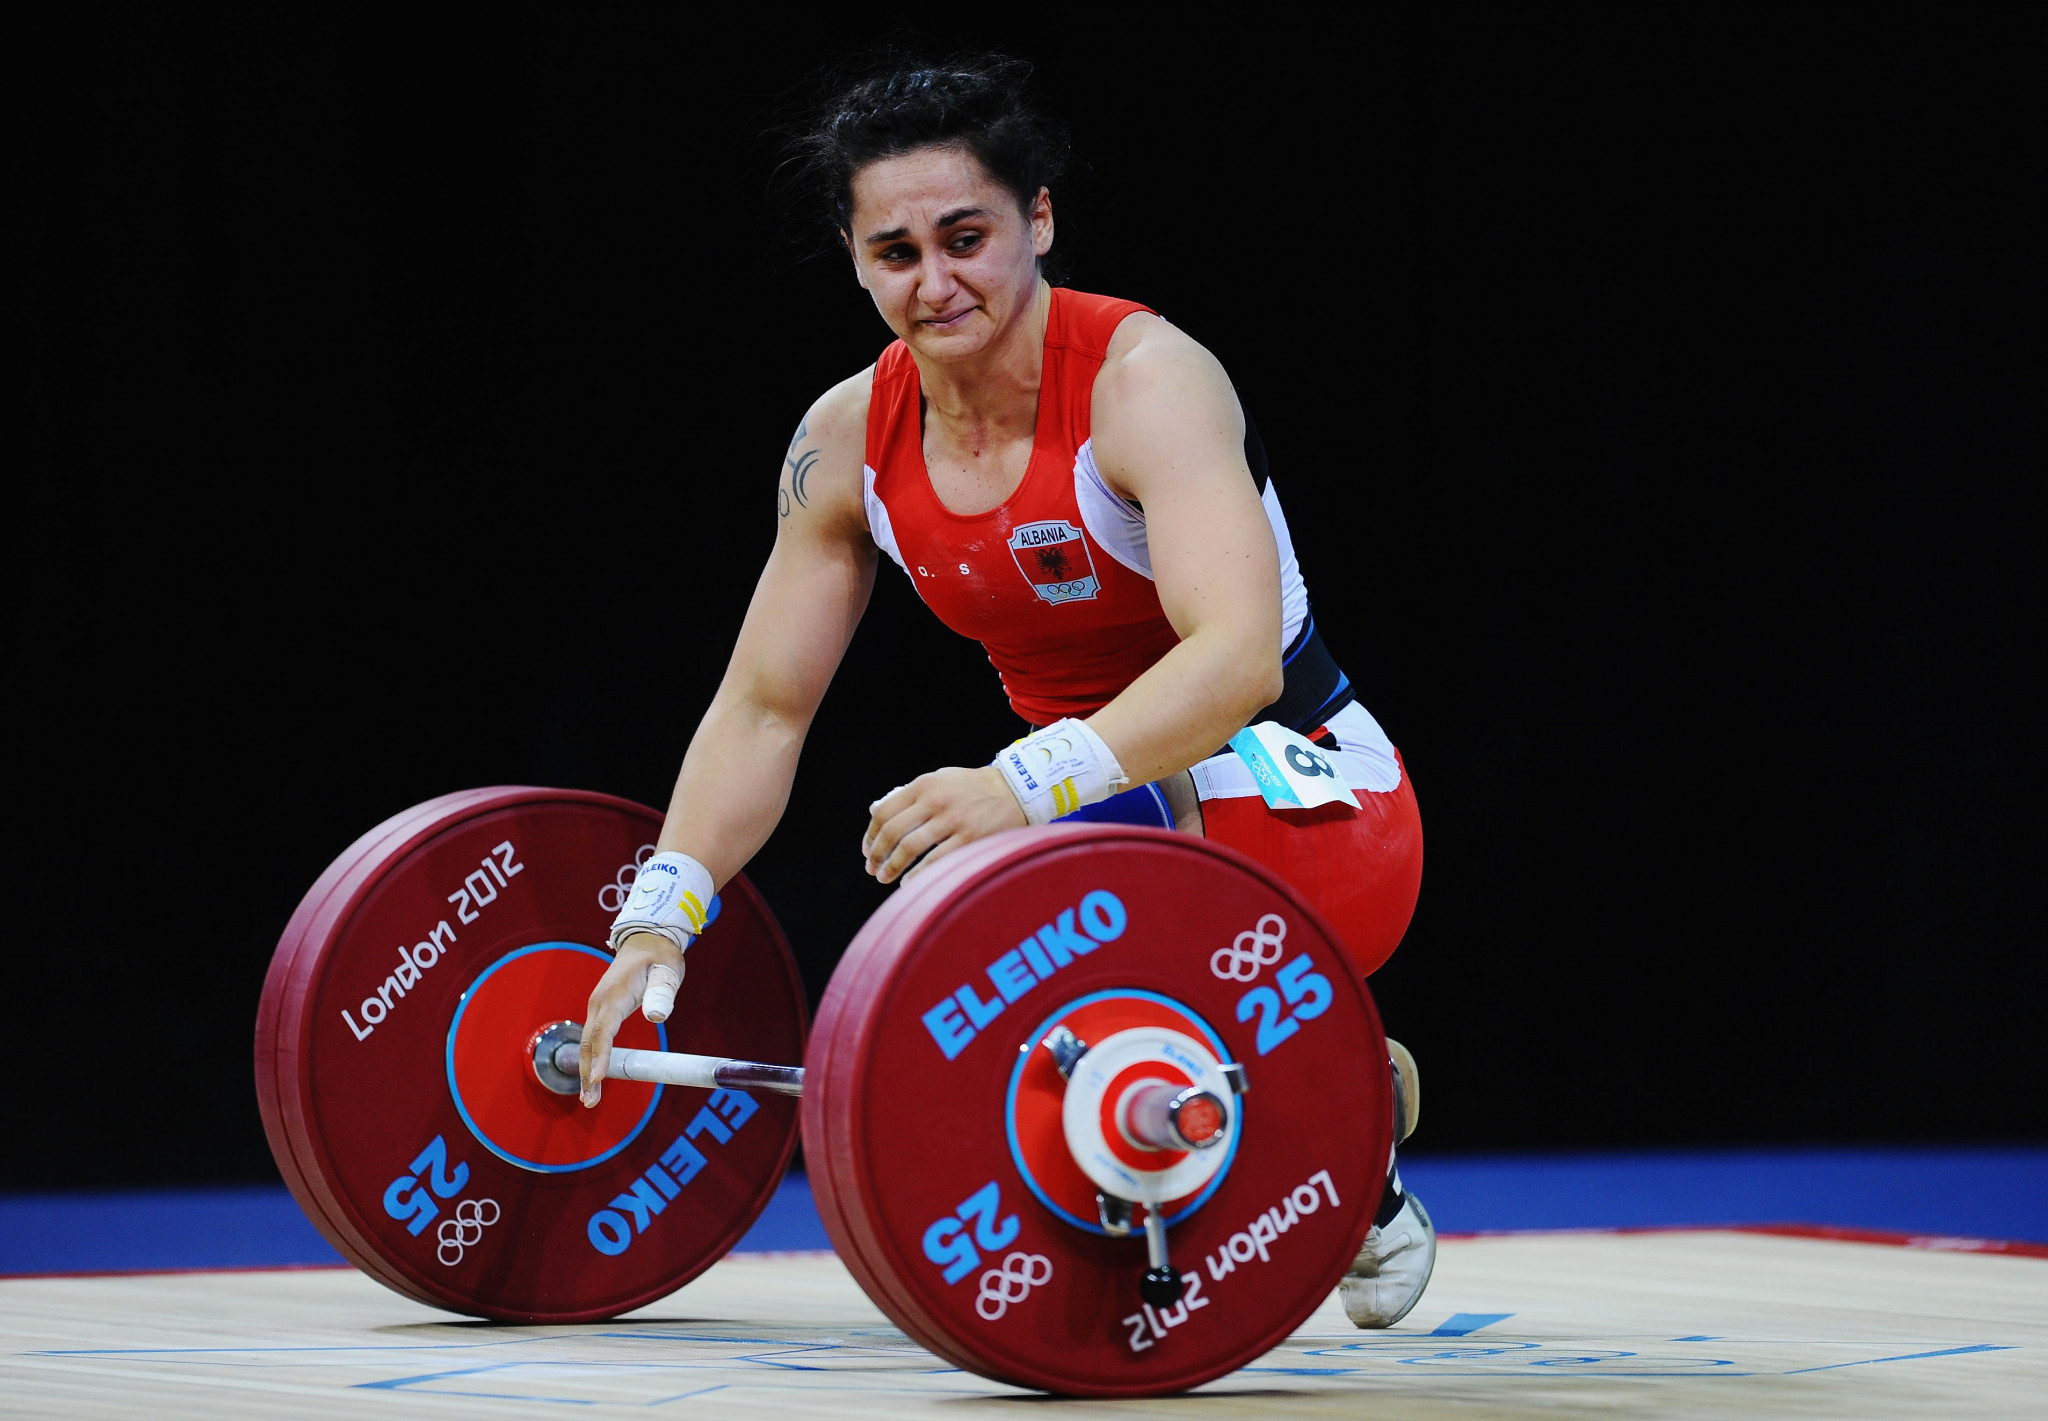 Romela Begaj's disqualification sparked a crisis which led to the European Championships being removed from Albania ©Getty Images